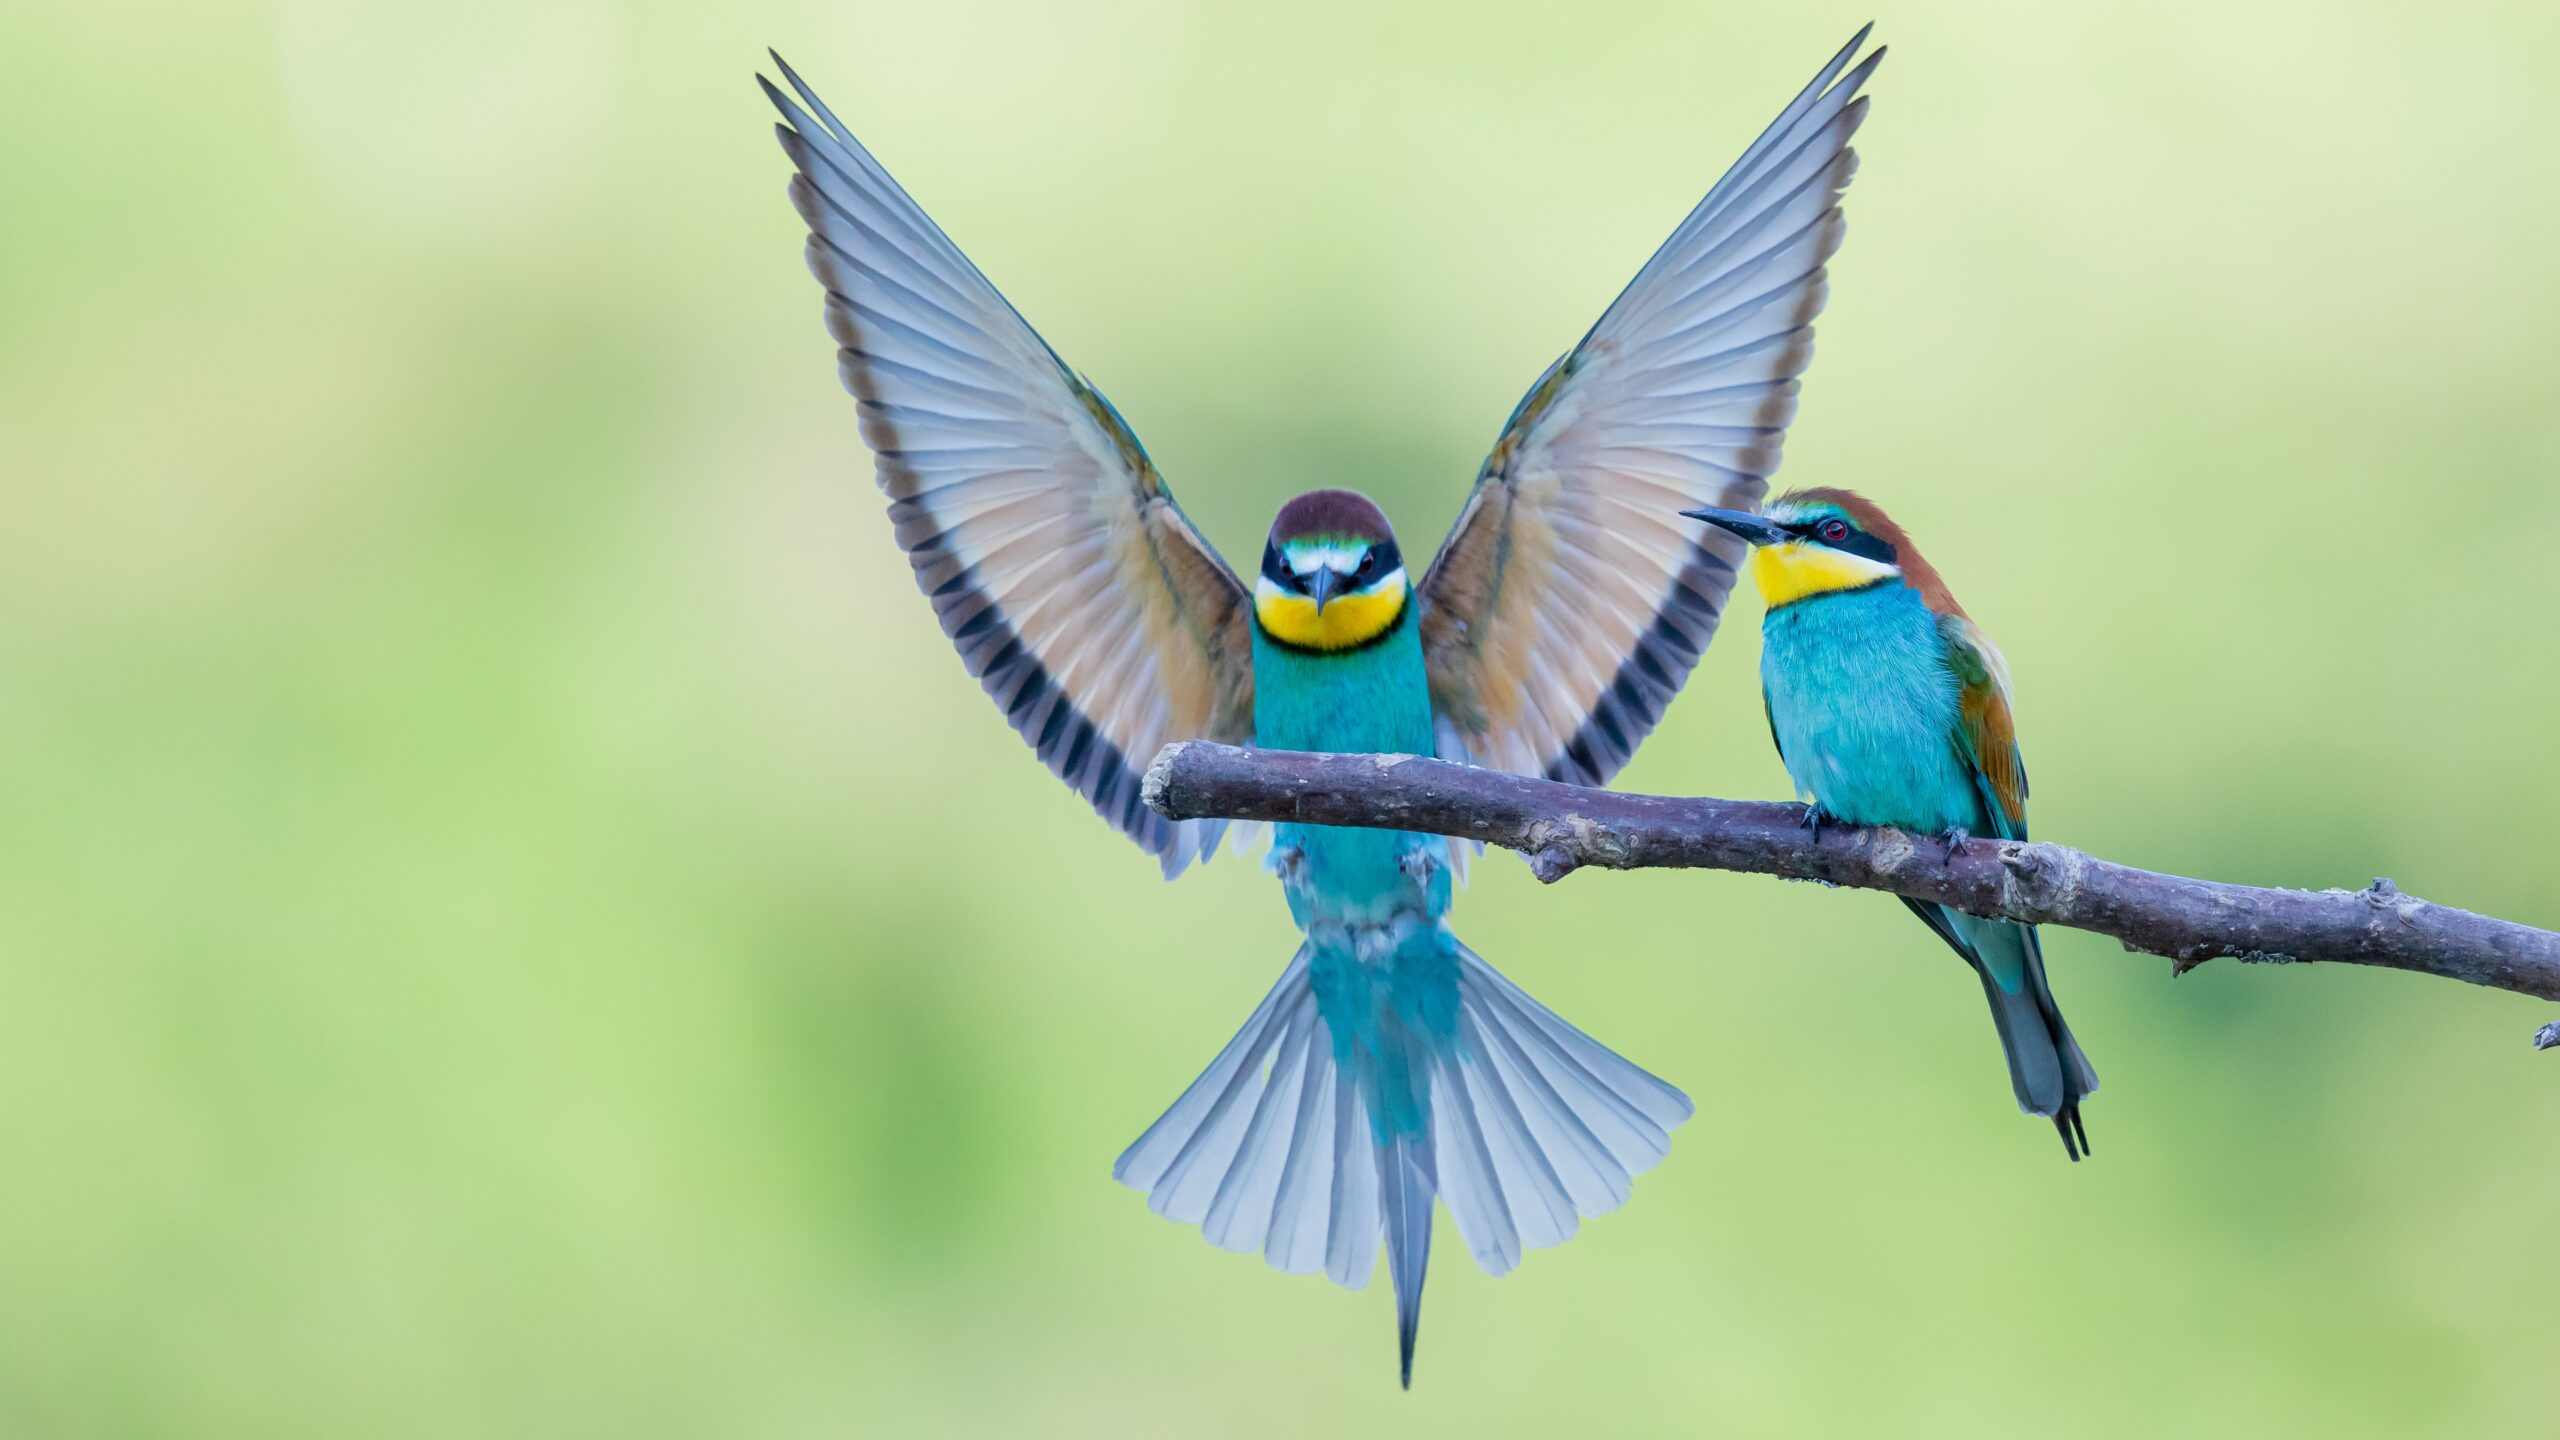 Bee-eaters with multicolored feathers sitting on the tree branch